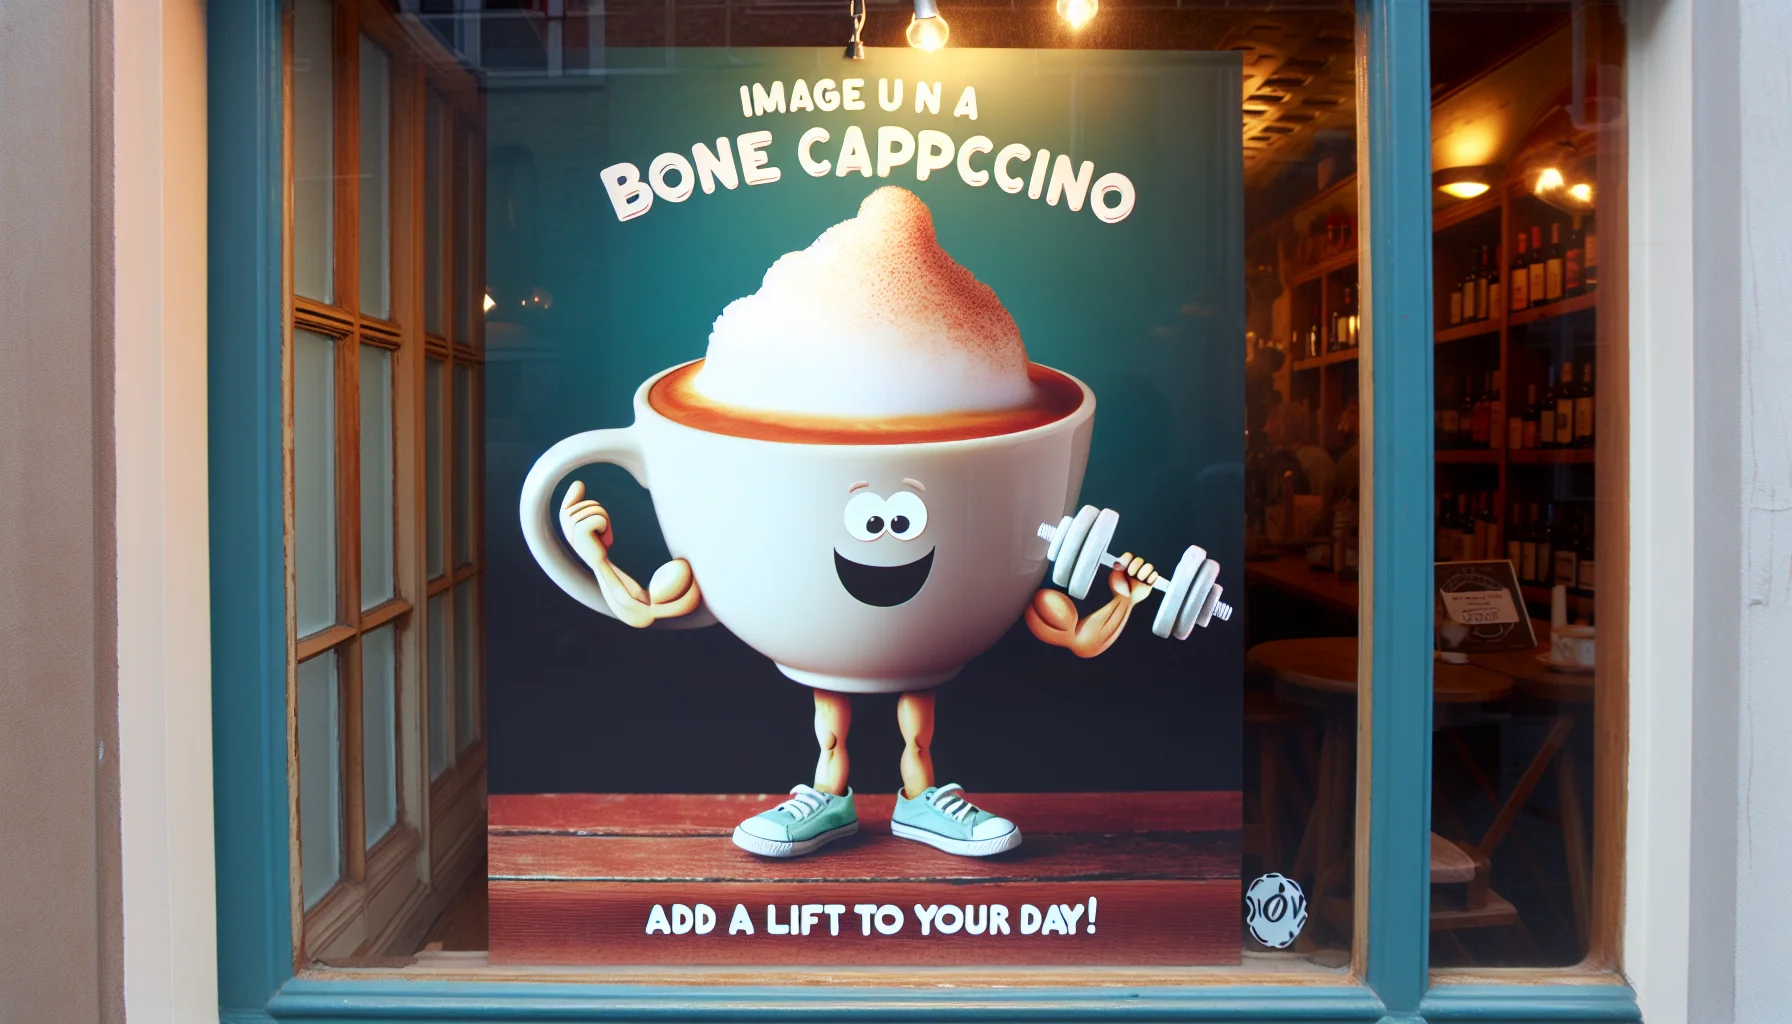 Imagine a lively scene taking place in a cozy and eclectic coffee shop. In the showcase window, there is a bone-dry cappuccino in a hilarious situation. It's shown as a cartoon character, quite cheerful with its foamy top resembling a curly white wig. It's striking a funky pose with its coffee cup body, lifting an imaginary barbell made of sugar cubes, exhuding an enthusiastic charm. The tagline below it says, 'Add a lift to your day!' This playful image sparks curiosity, laughter, and a shared appreciation of the simplicity and joy of coffee culture.